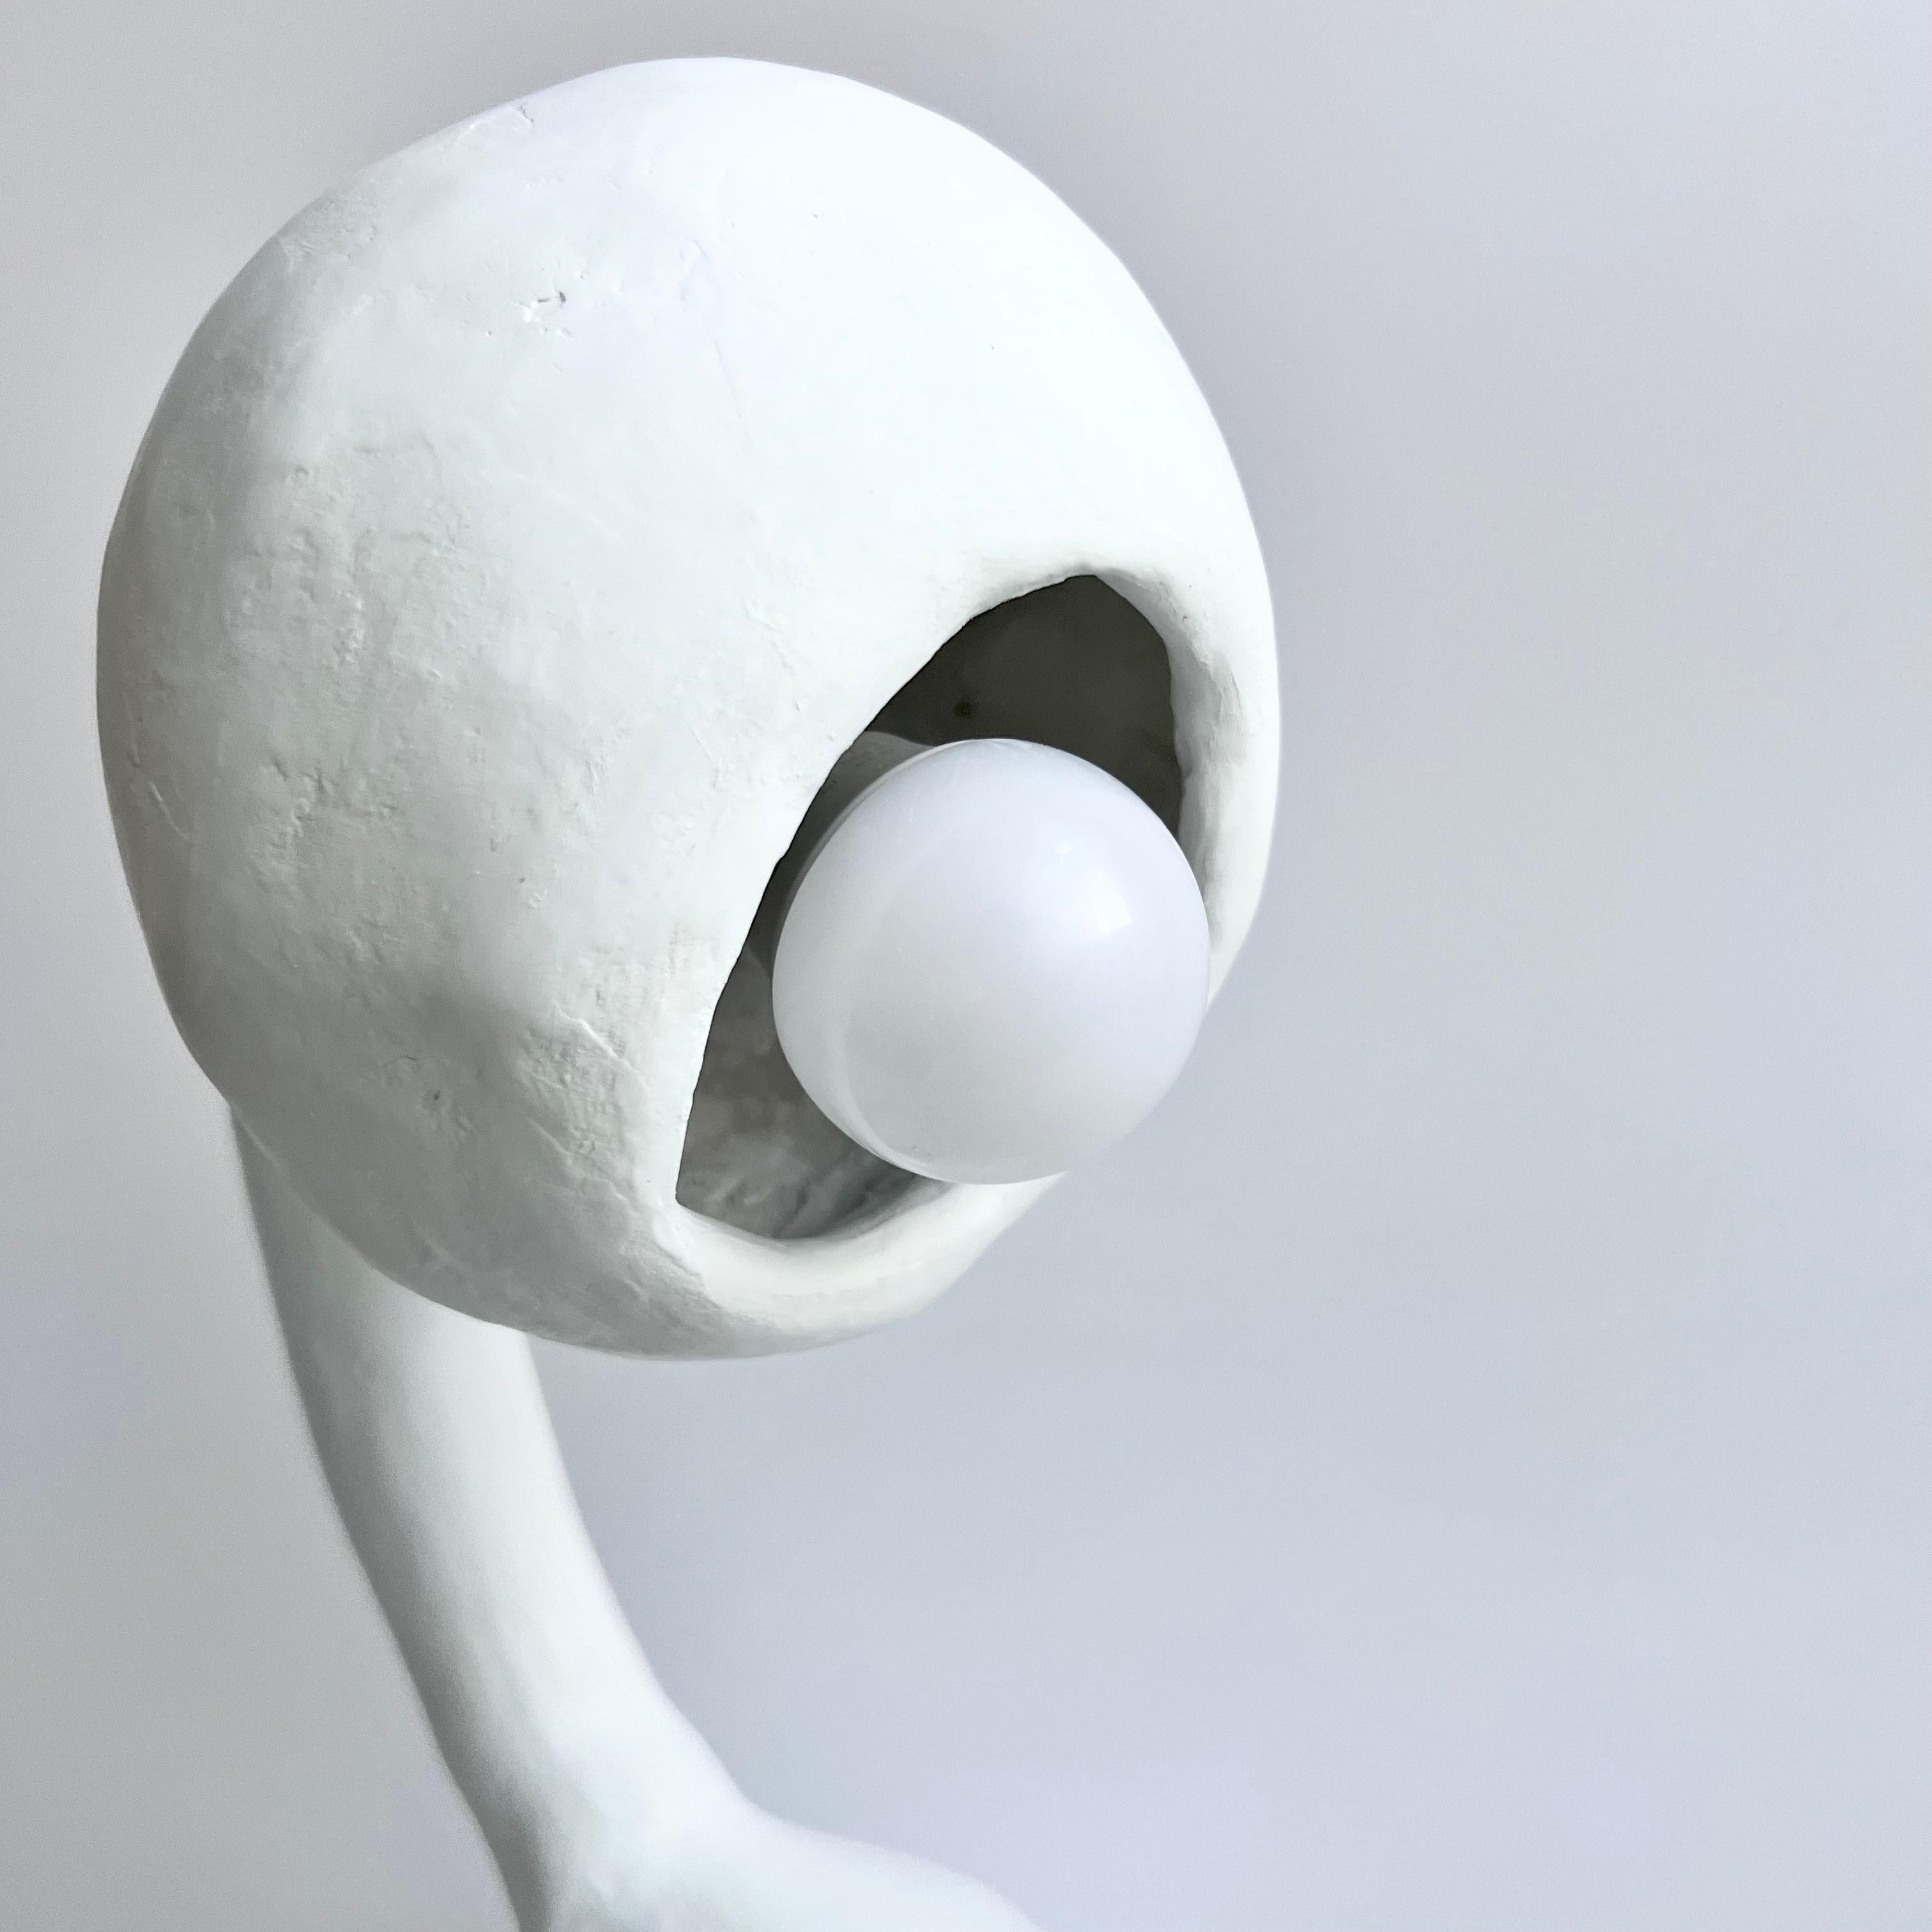 Biomorphic Line by Studio Chora, Task Table Lamp, White Lime Plaster, In Stock 1